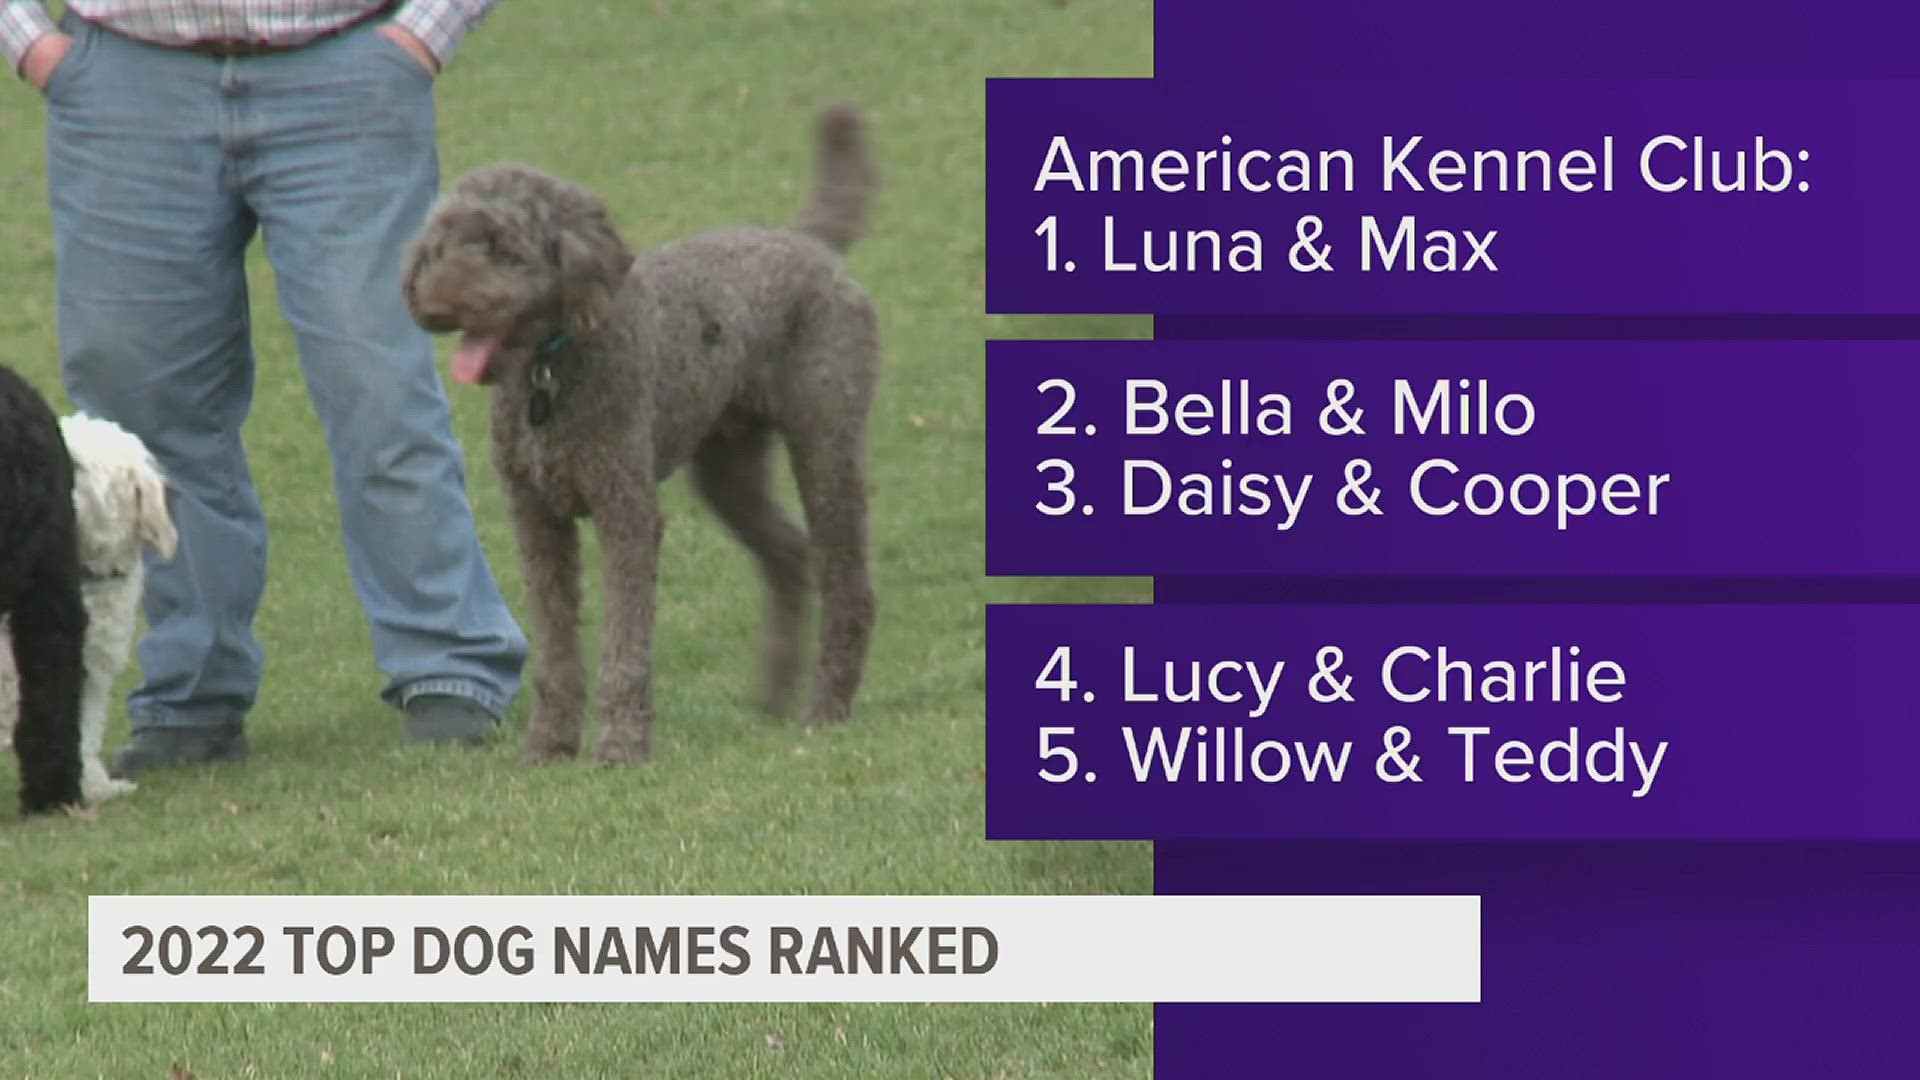 According to the American Kennel Club, "Luna" and "Max" were the top names for female and male dogs respectively.